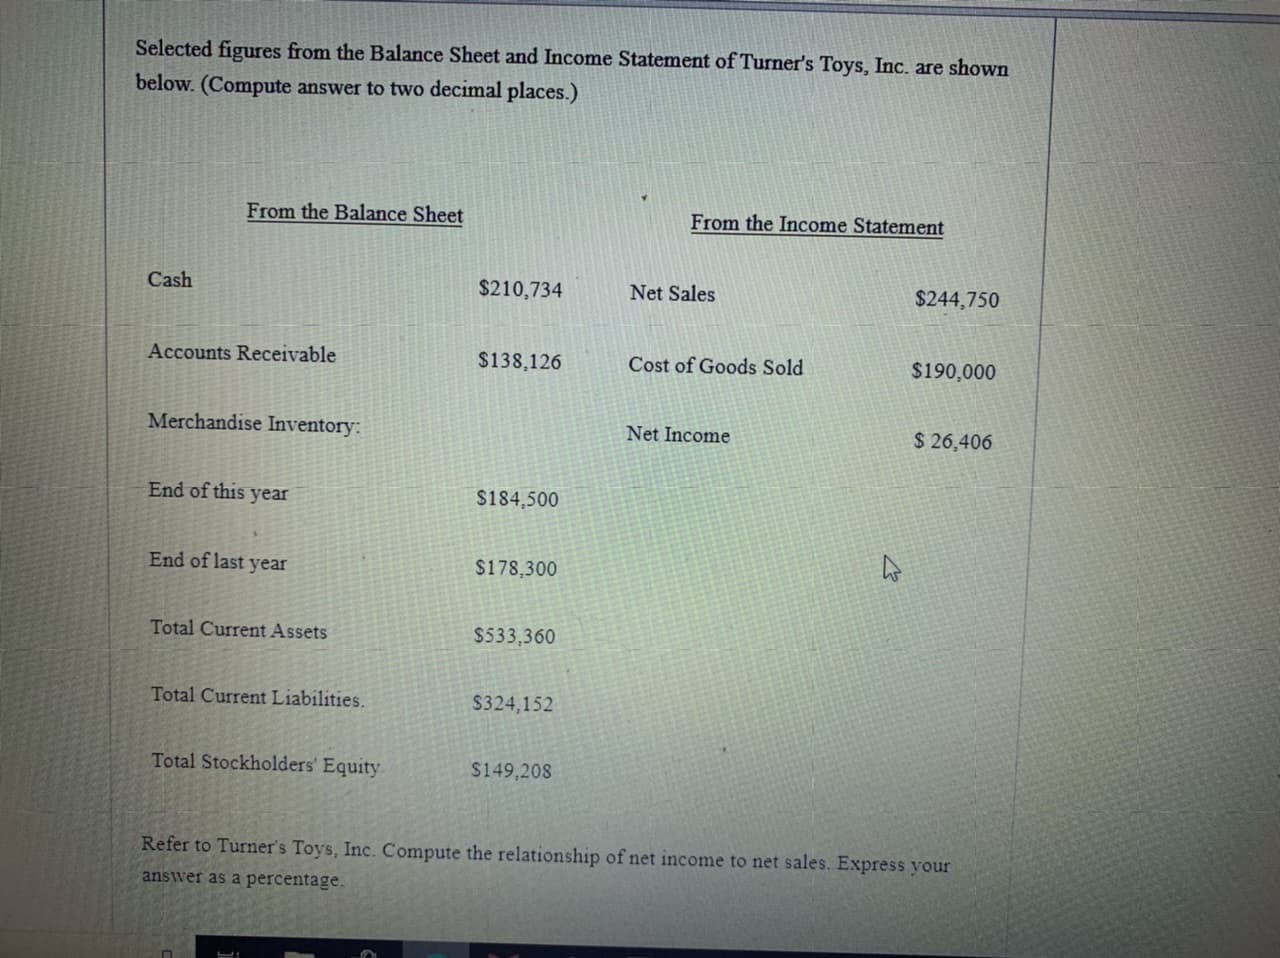 Selected figures from the Balance Sheet and Income Statement of Turner's Toys, Inc. are shown
below. (Compute answer to two decimal places.)
From the Balance Sheet
From the Income Statement
Cash
$210,734
Net Sales
$244,750
Accounts Receivable
$138,126
Cost of Goods Sold
$190,000
Merchandise Inventory:
Net Income
$ 26,406
End of this year
$184,500
End of last year
$178,300
Total Current Assets
$533,360
Total Current Liabilities.
$324,152
Total Stockholders' Equity
$149,208
Refer to Turner's Toys, Inc. Compute the relationship of net income to net sales. Express your
answer as a percentage.
